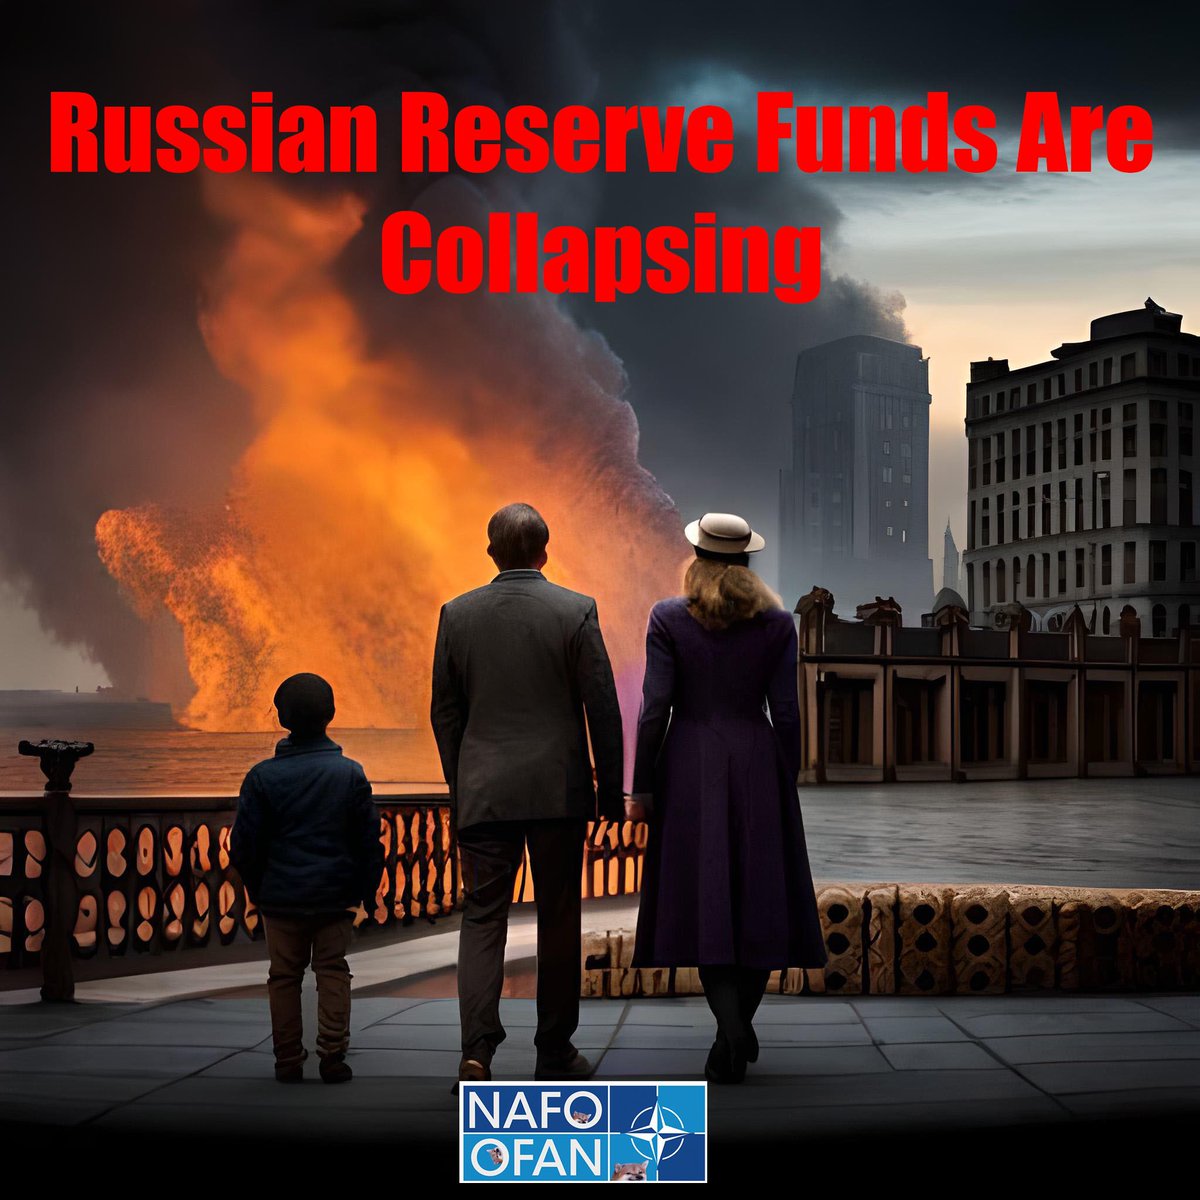 Prior to the invasion, the sovereign wealth fund was valued at $150 Billion USD. When the indicted War Criminal Putin launched his murderous and illegal venture in Ukraine in February 2022, the Ruble crashed to around 132 to one USD. Putin raided the sovereign wealth funds to…